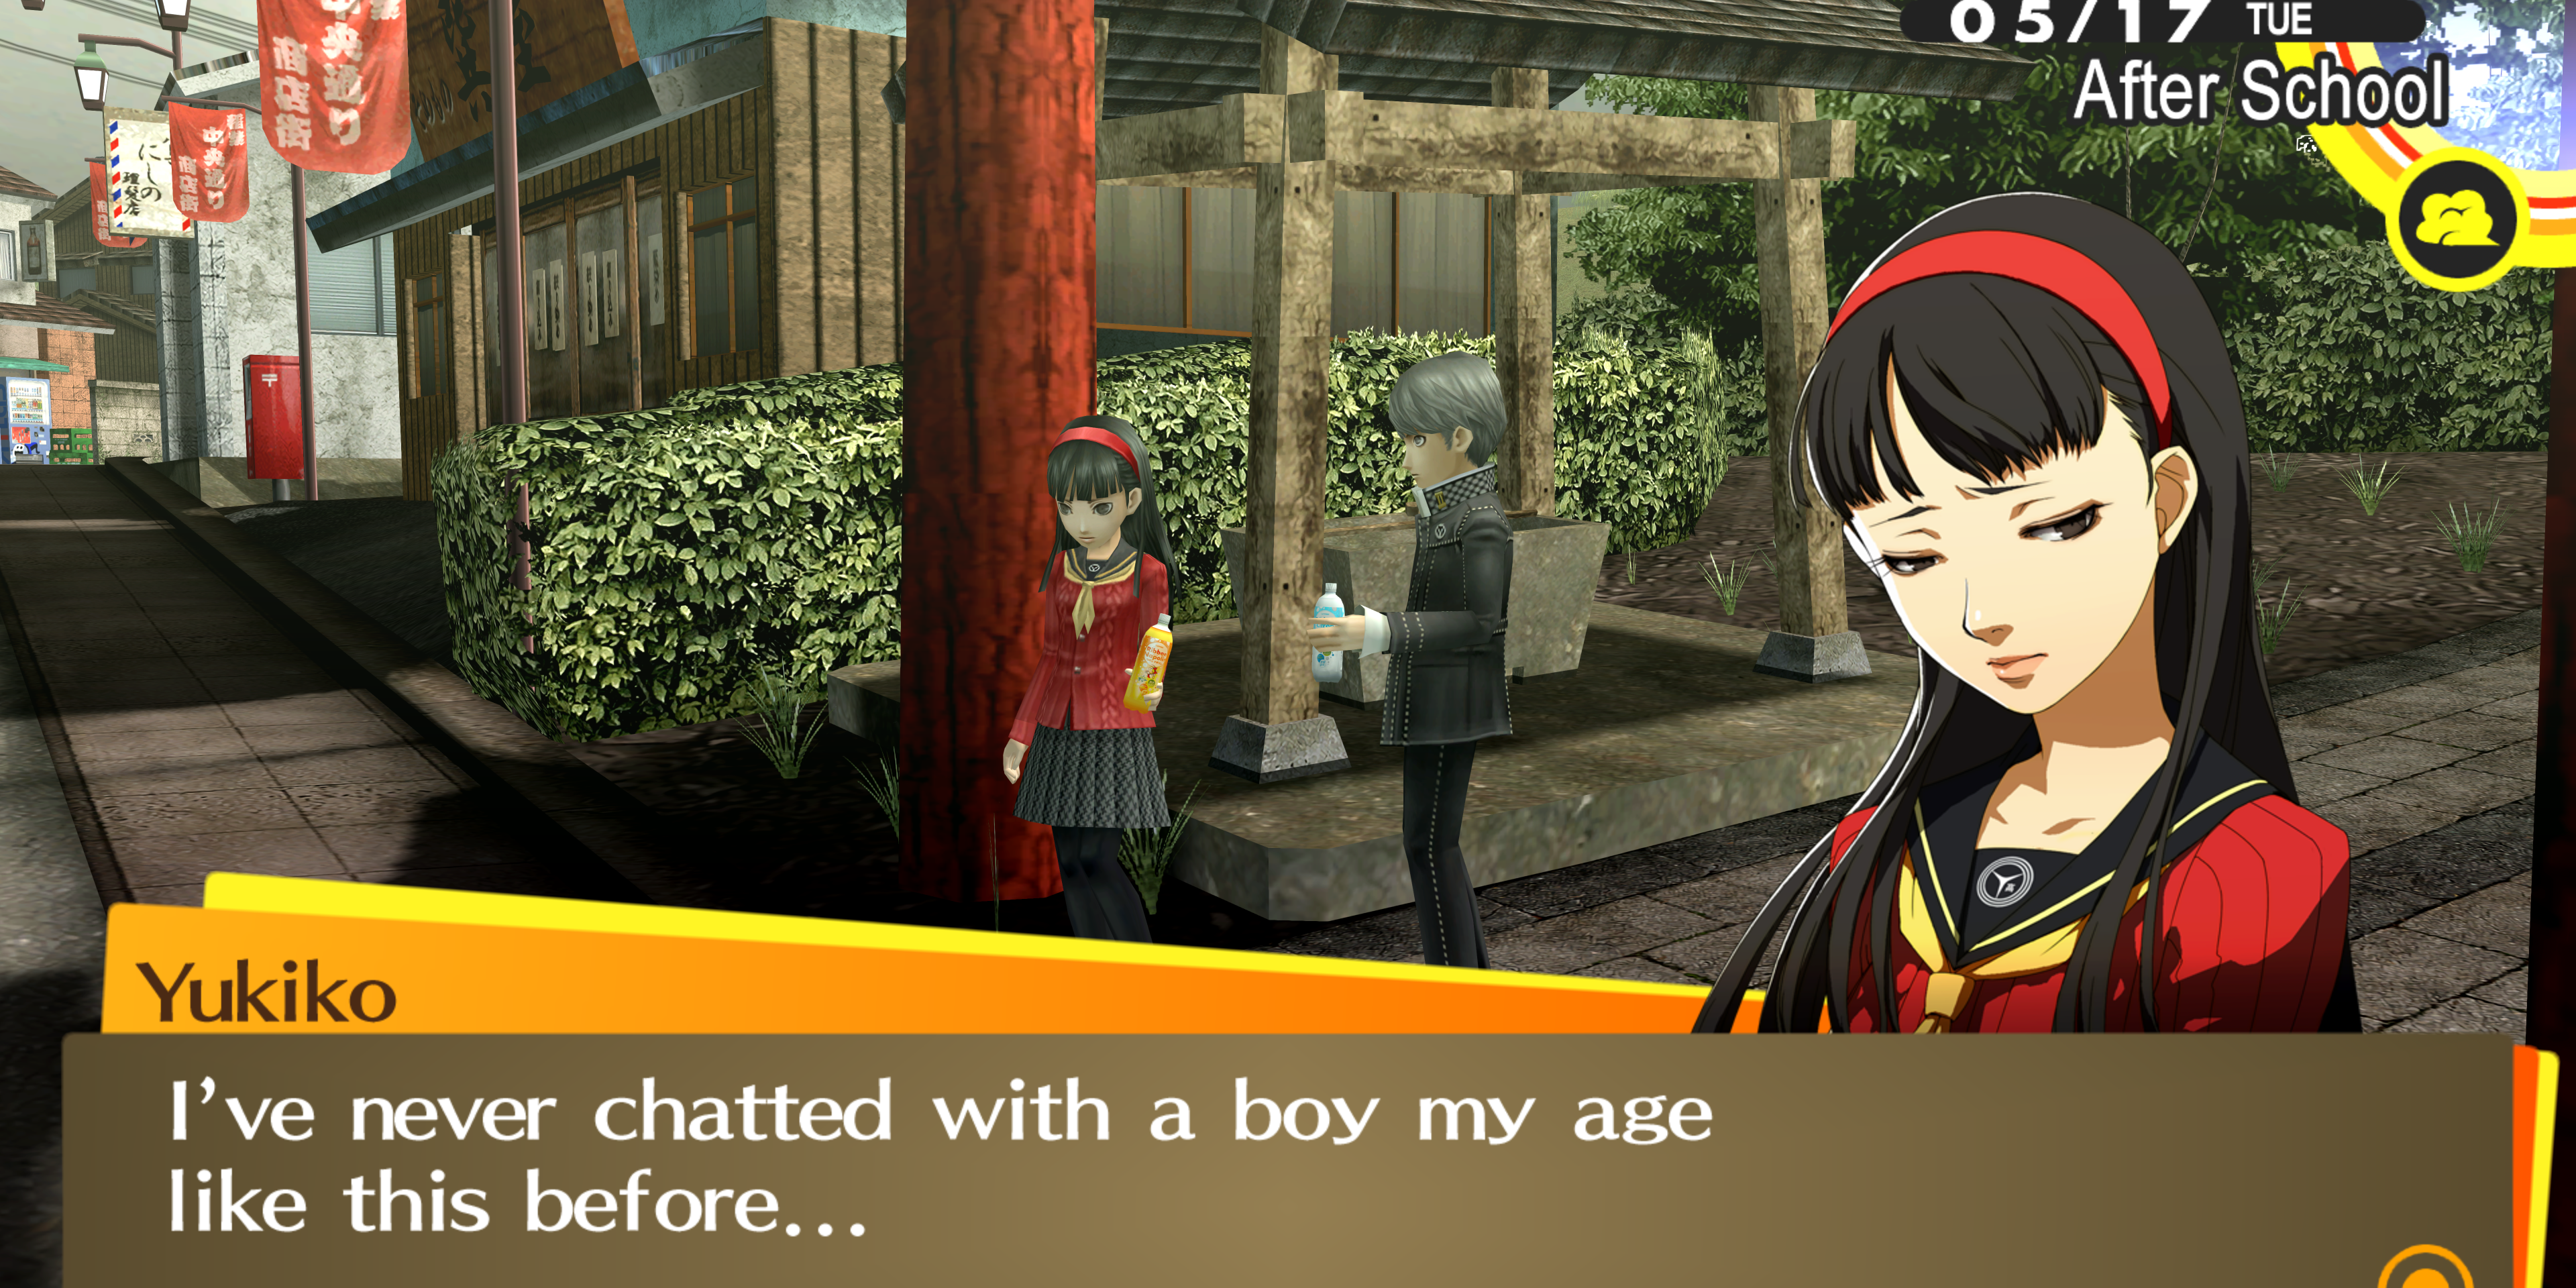 The player speaks with Yukiko in Persona 4 Golden